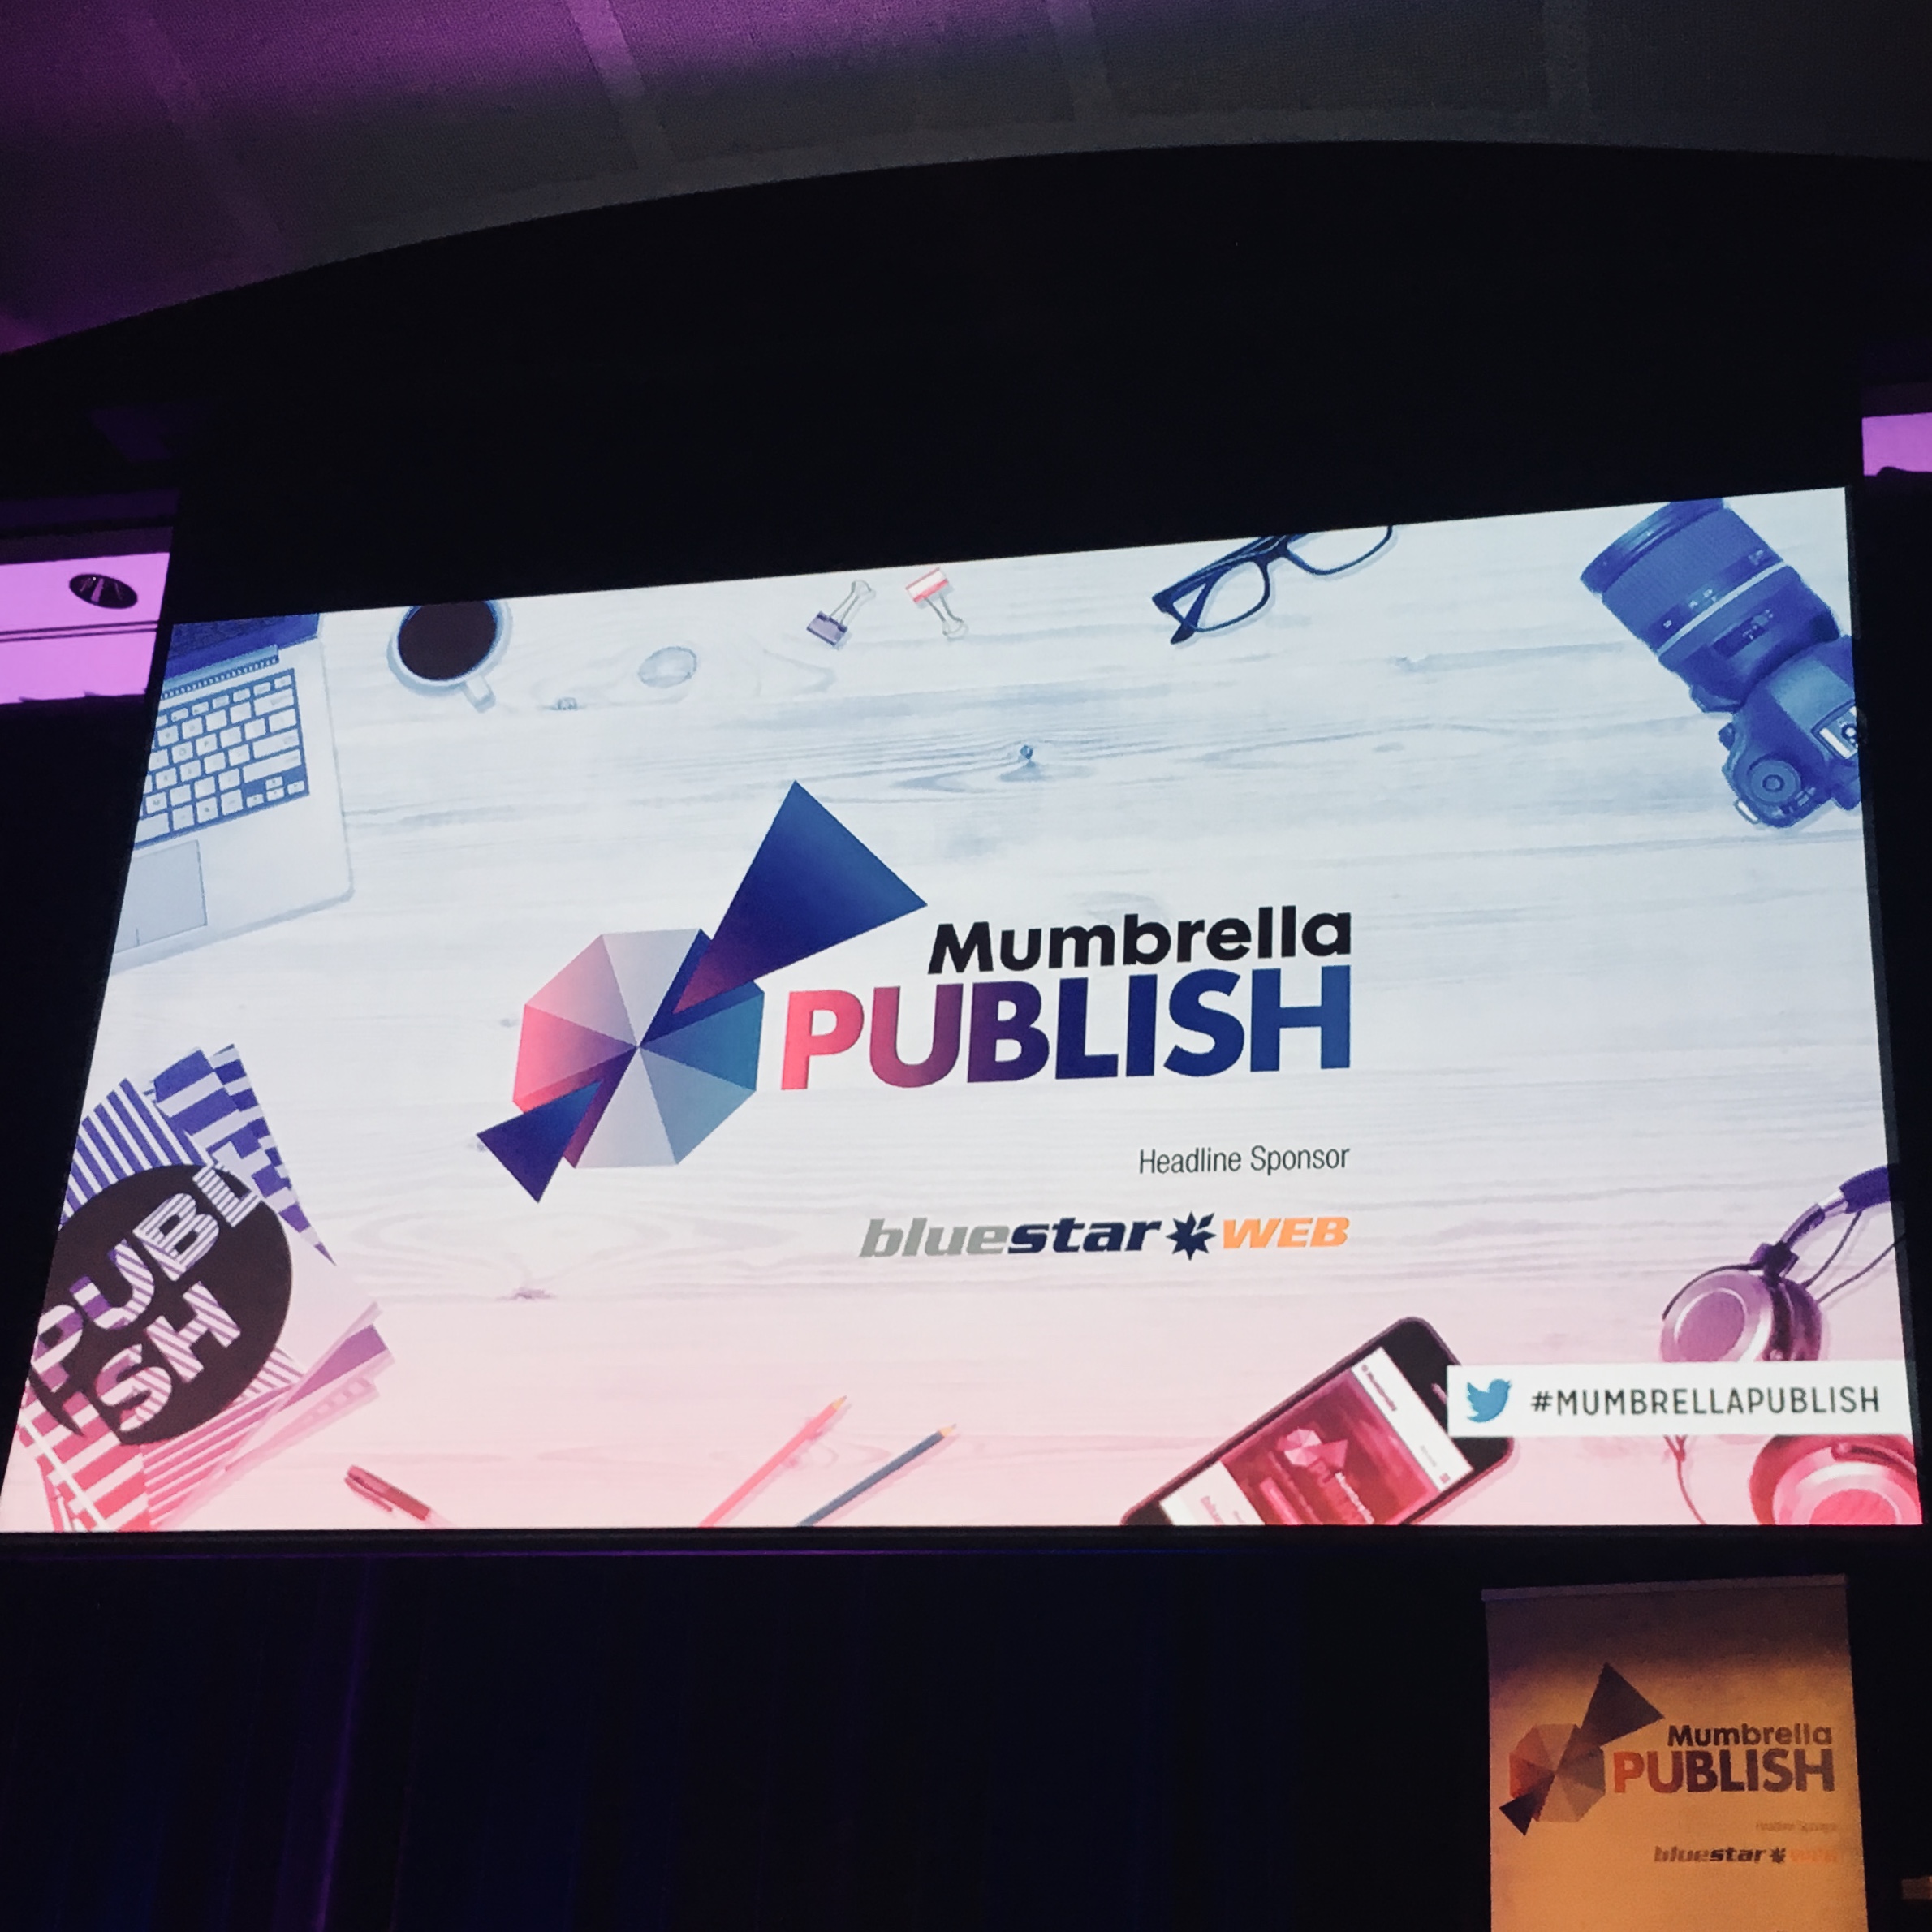 Mumbrella Publish – Making your content king, from the industry bigwigs!